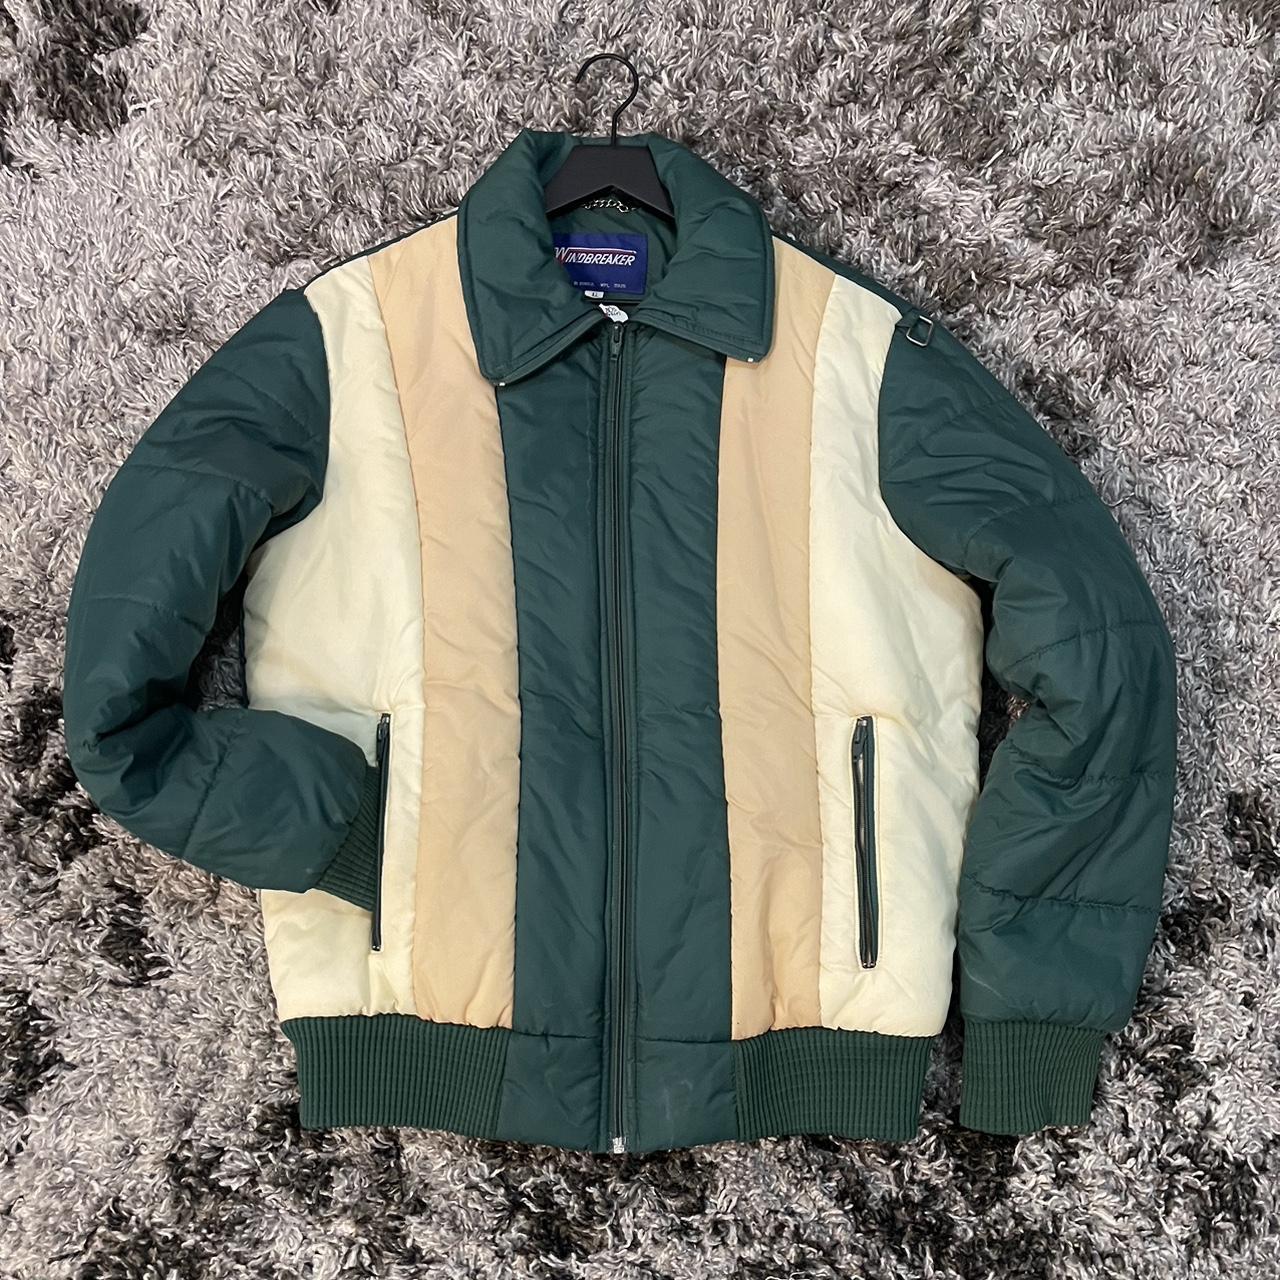 Vintage bombers From the 80s Beautiful condition - Depop